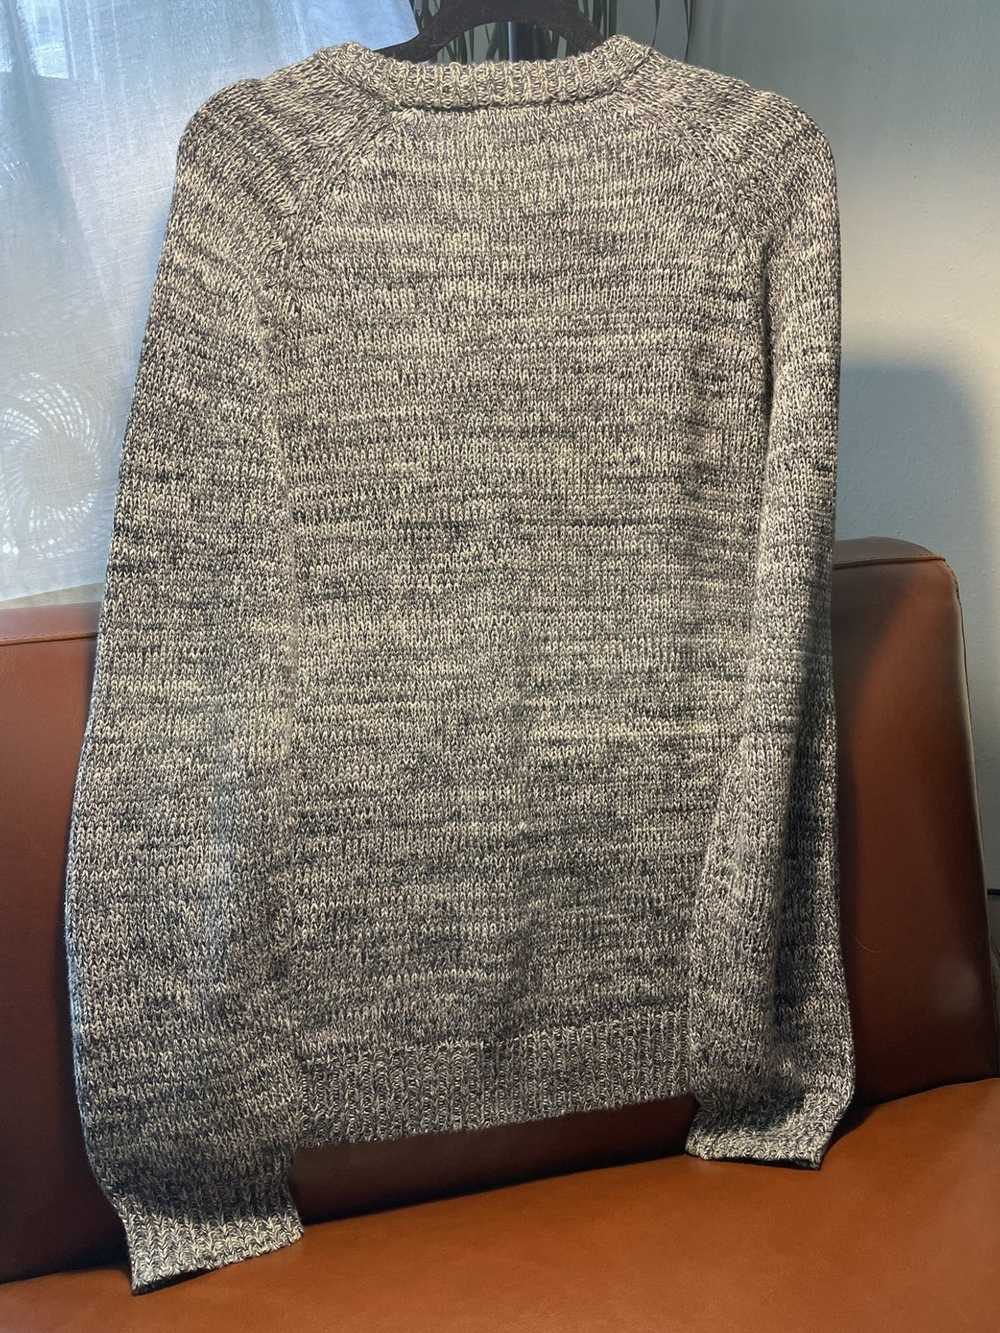 Cos Marled Grey Knit Sweater - image 5